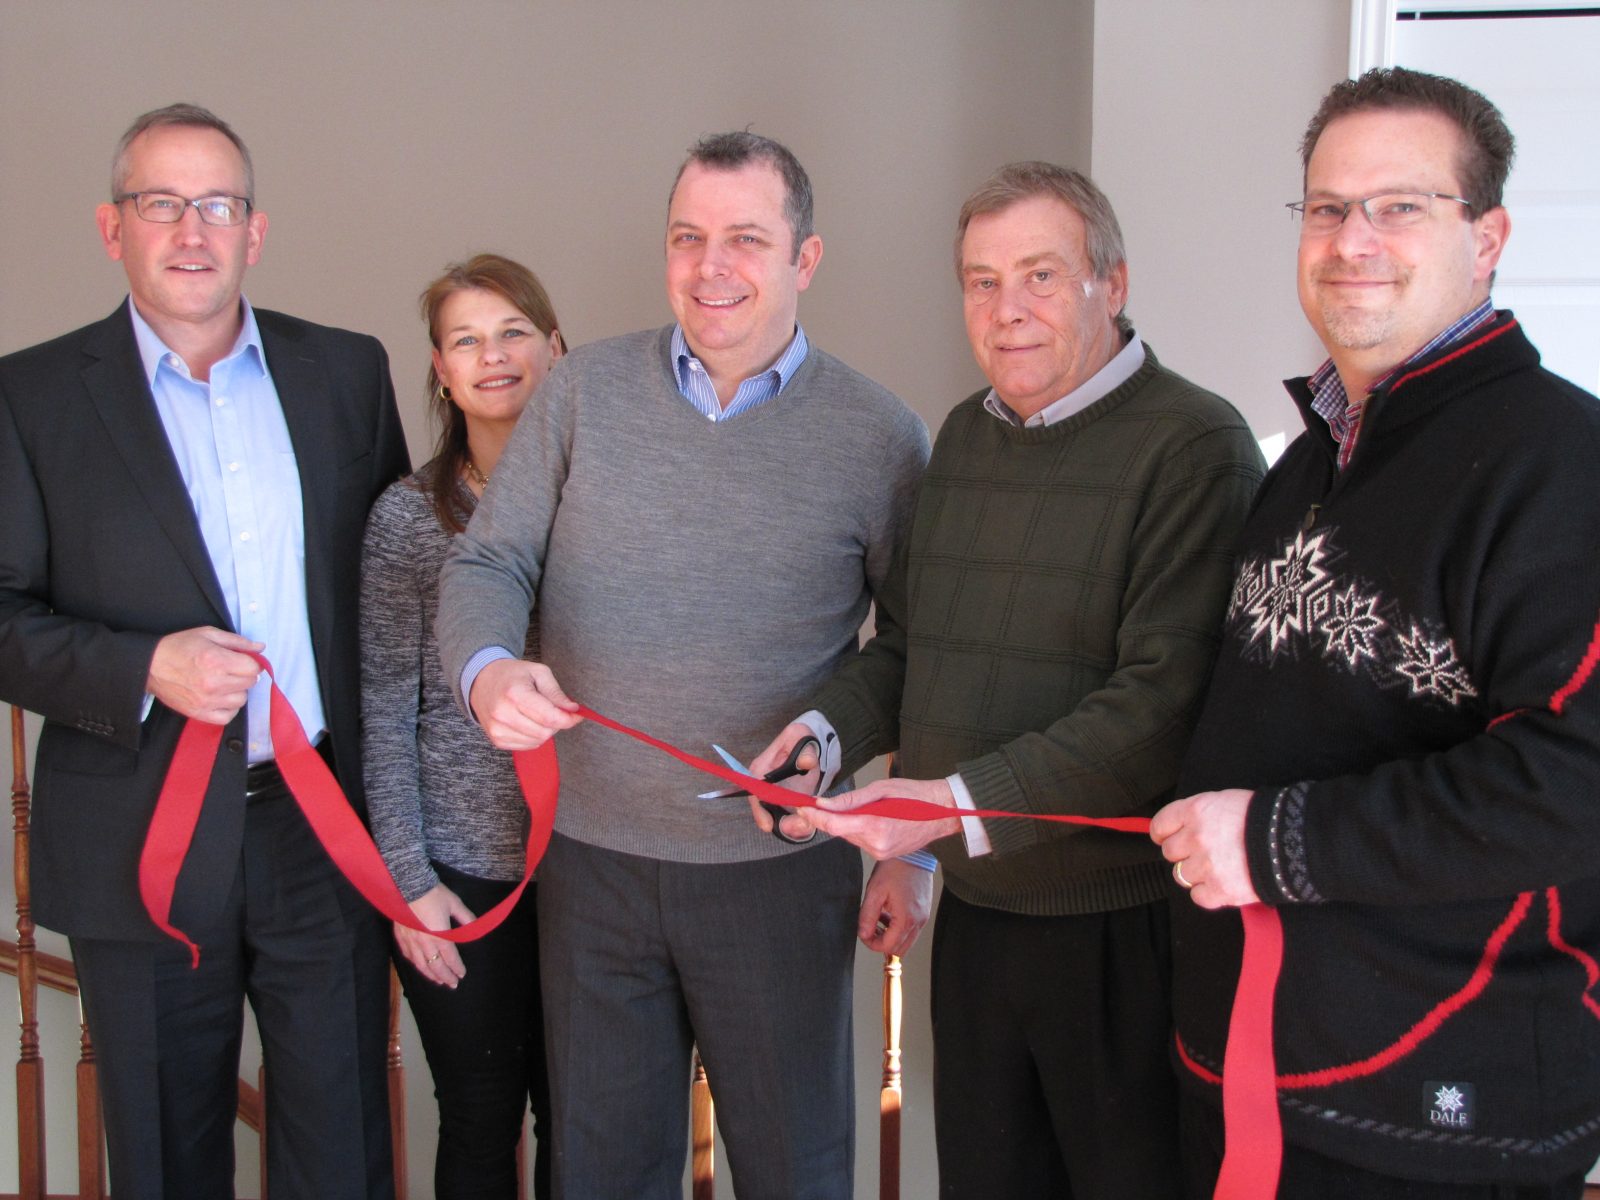 Ribbon-cutting for new downtown condo development